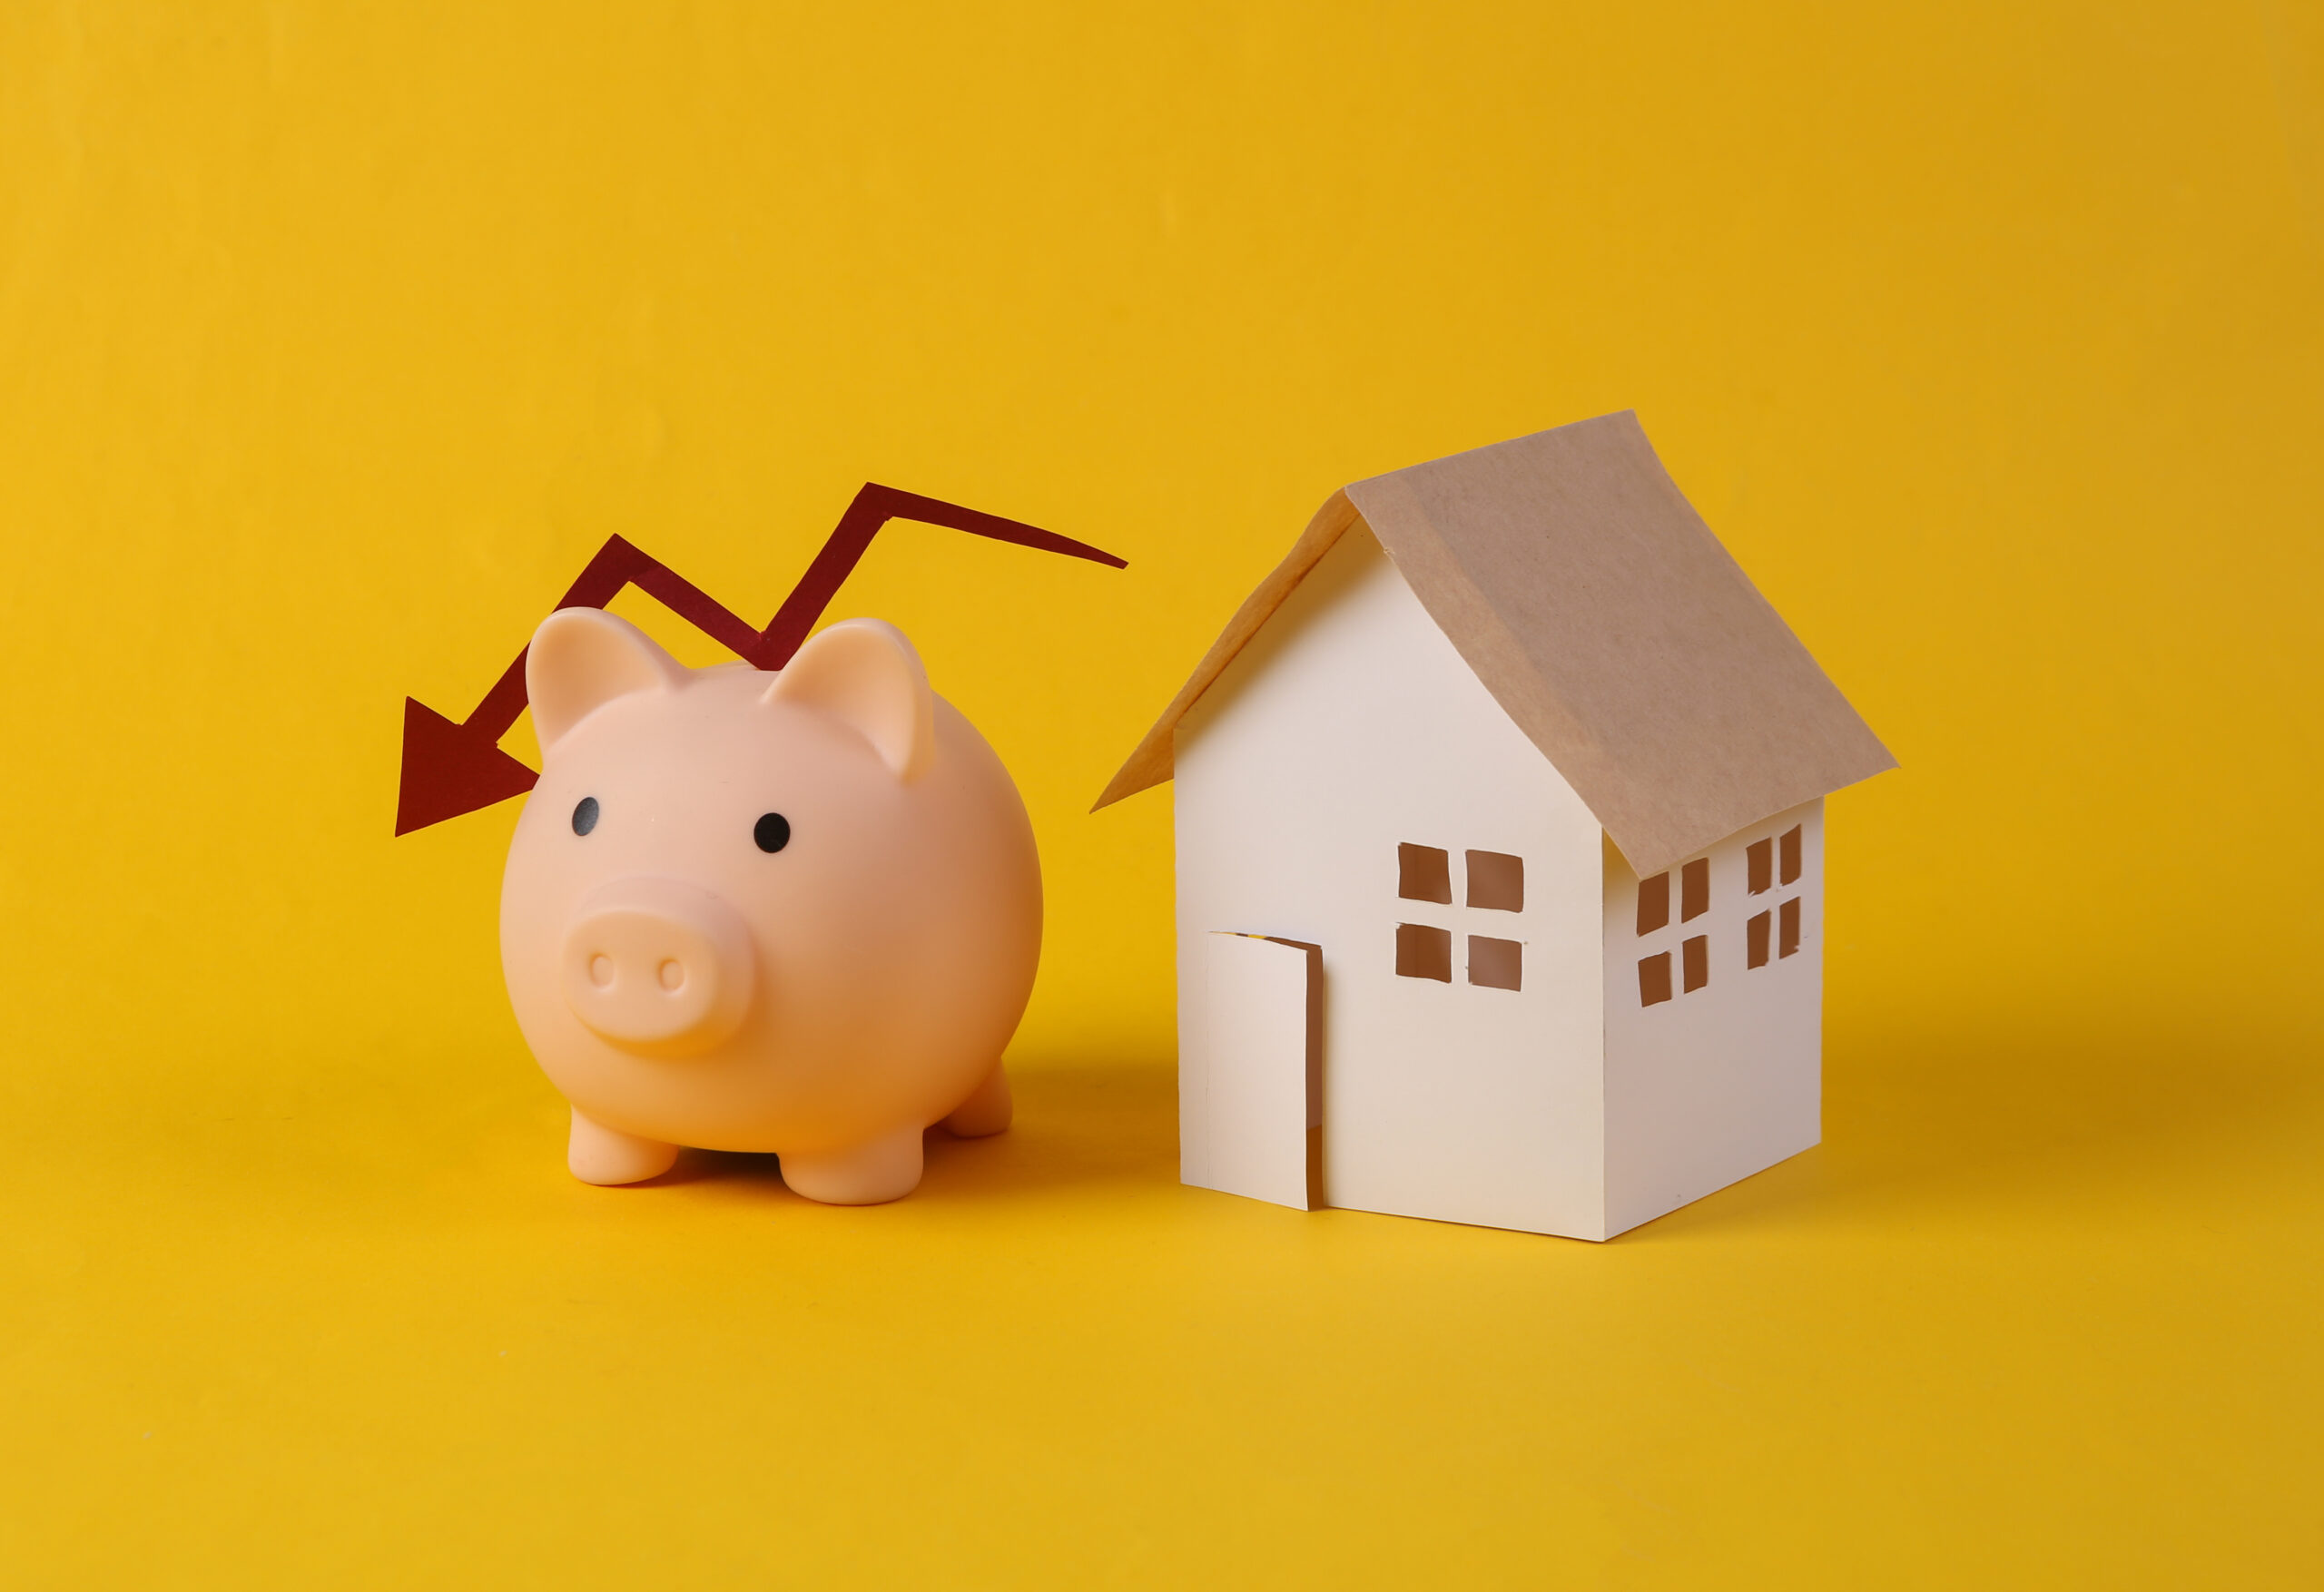 Falling housing prices. House figurine and piggy bank with falling arrow on yellow background